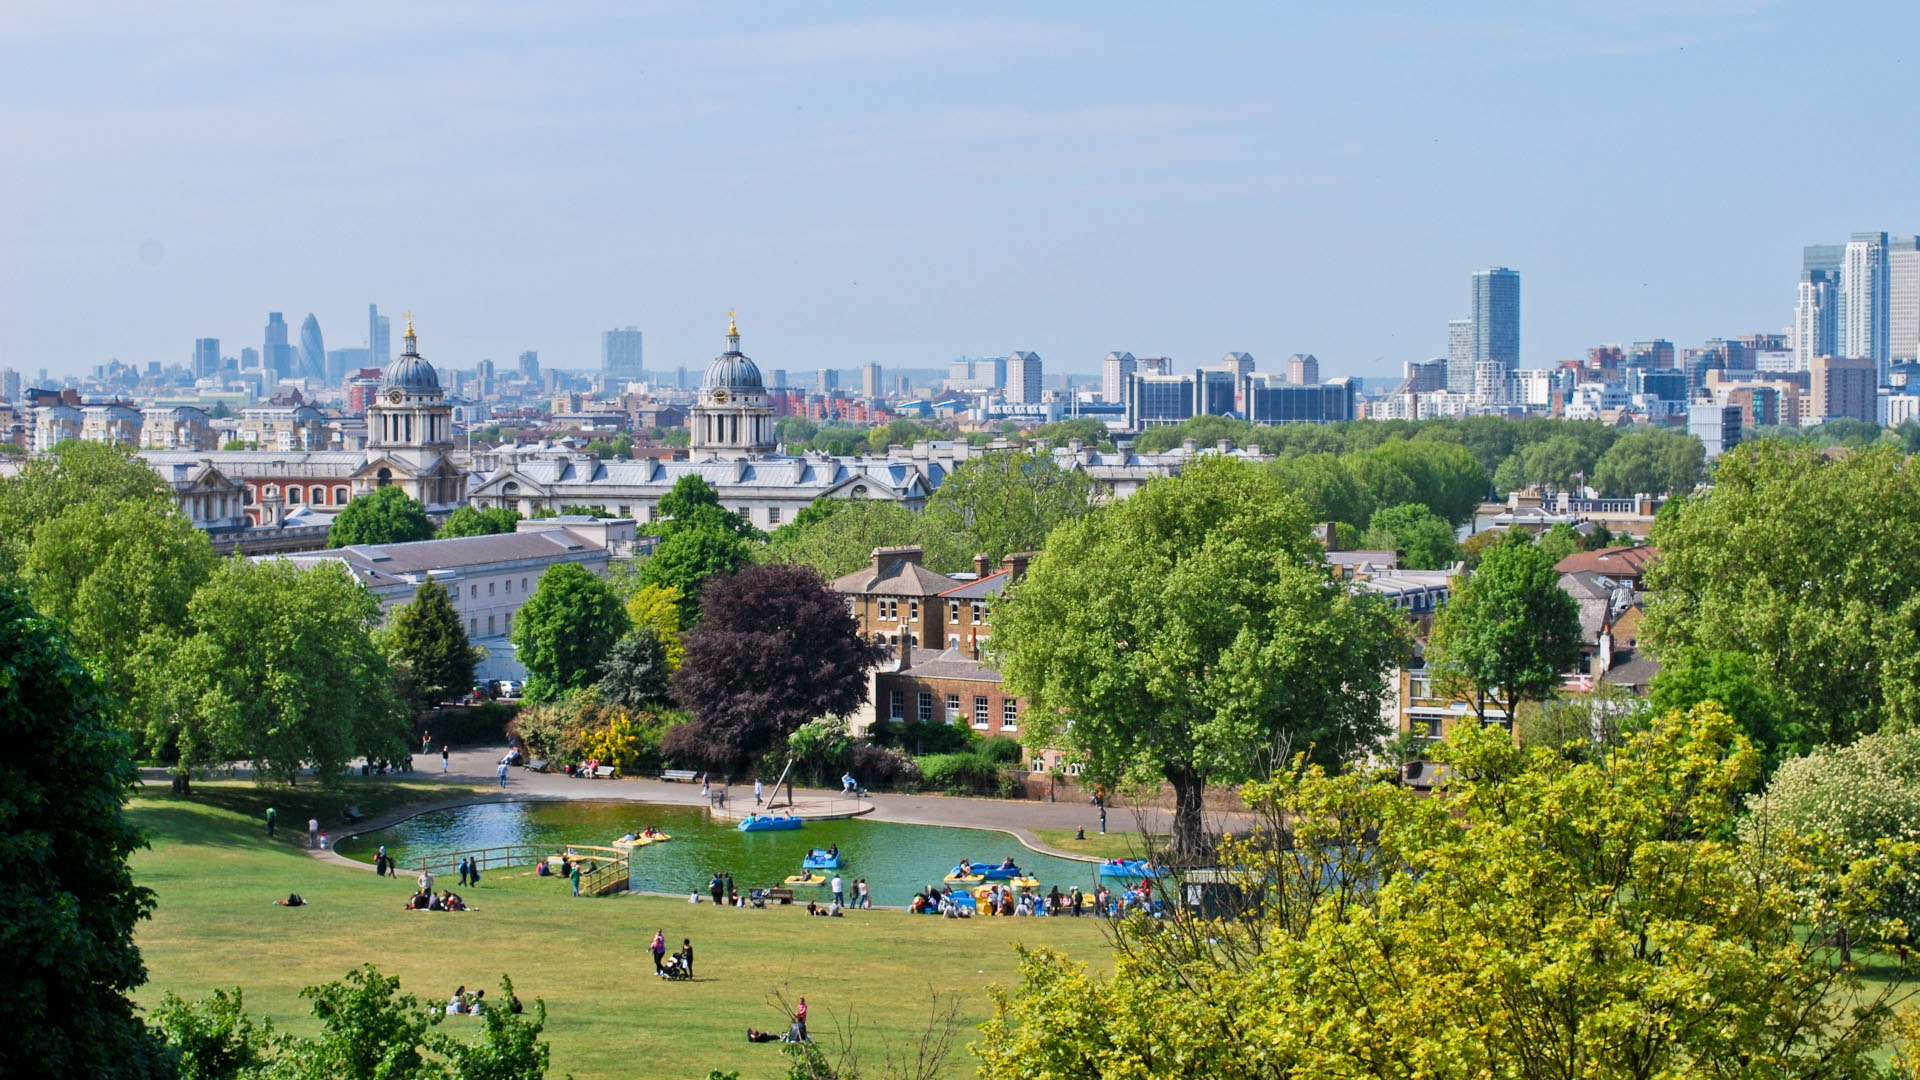 People sit on green lawns in Greenwich Park in front of a view of the London skyline.